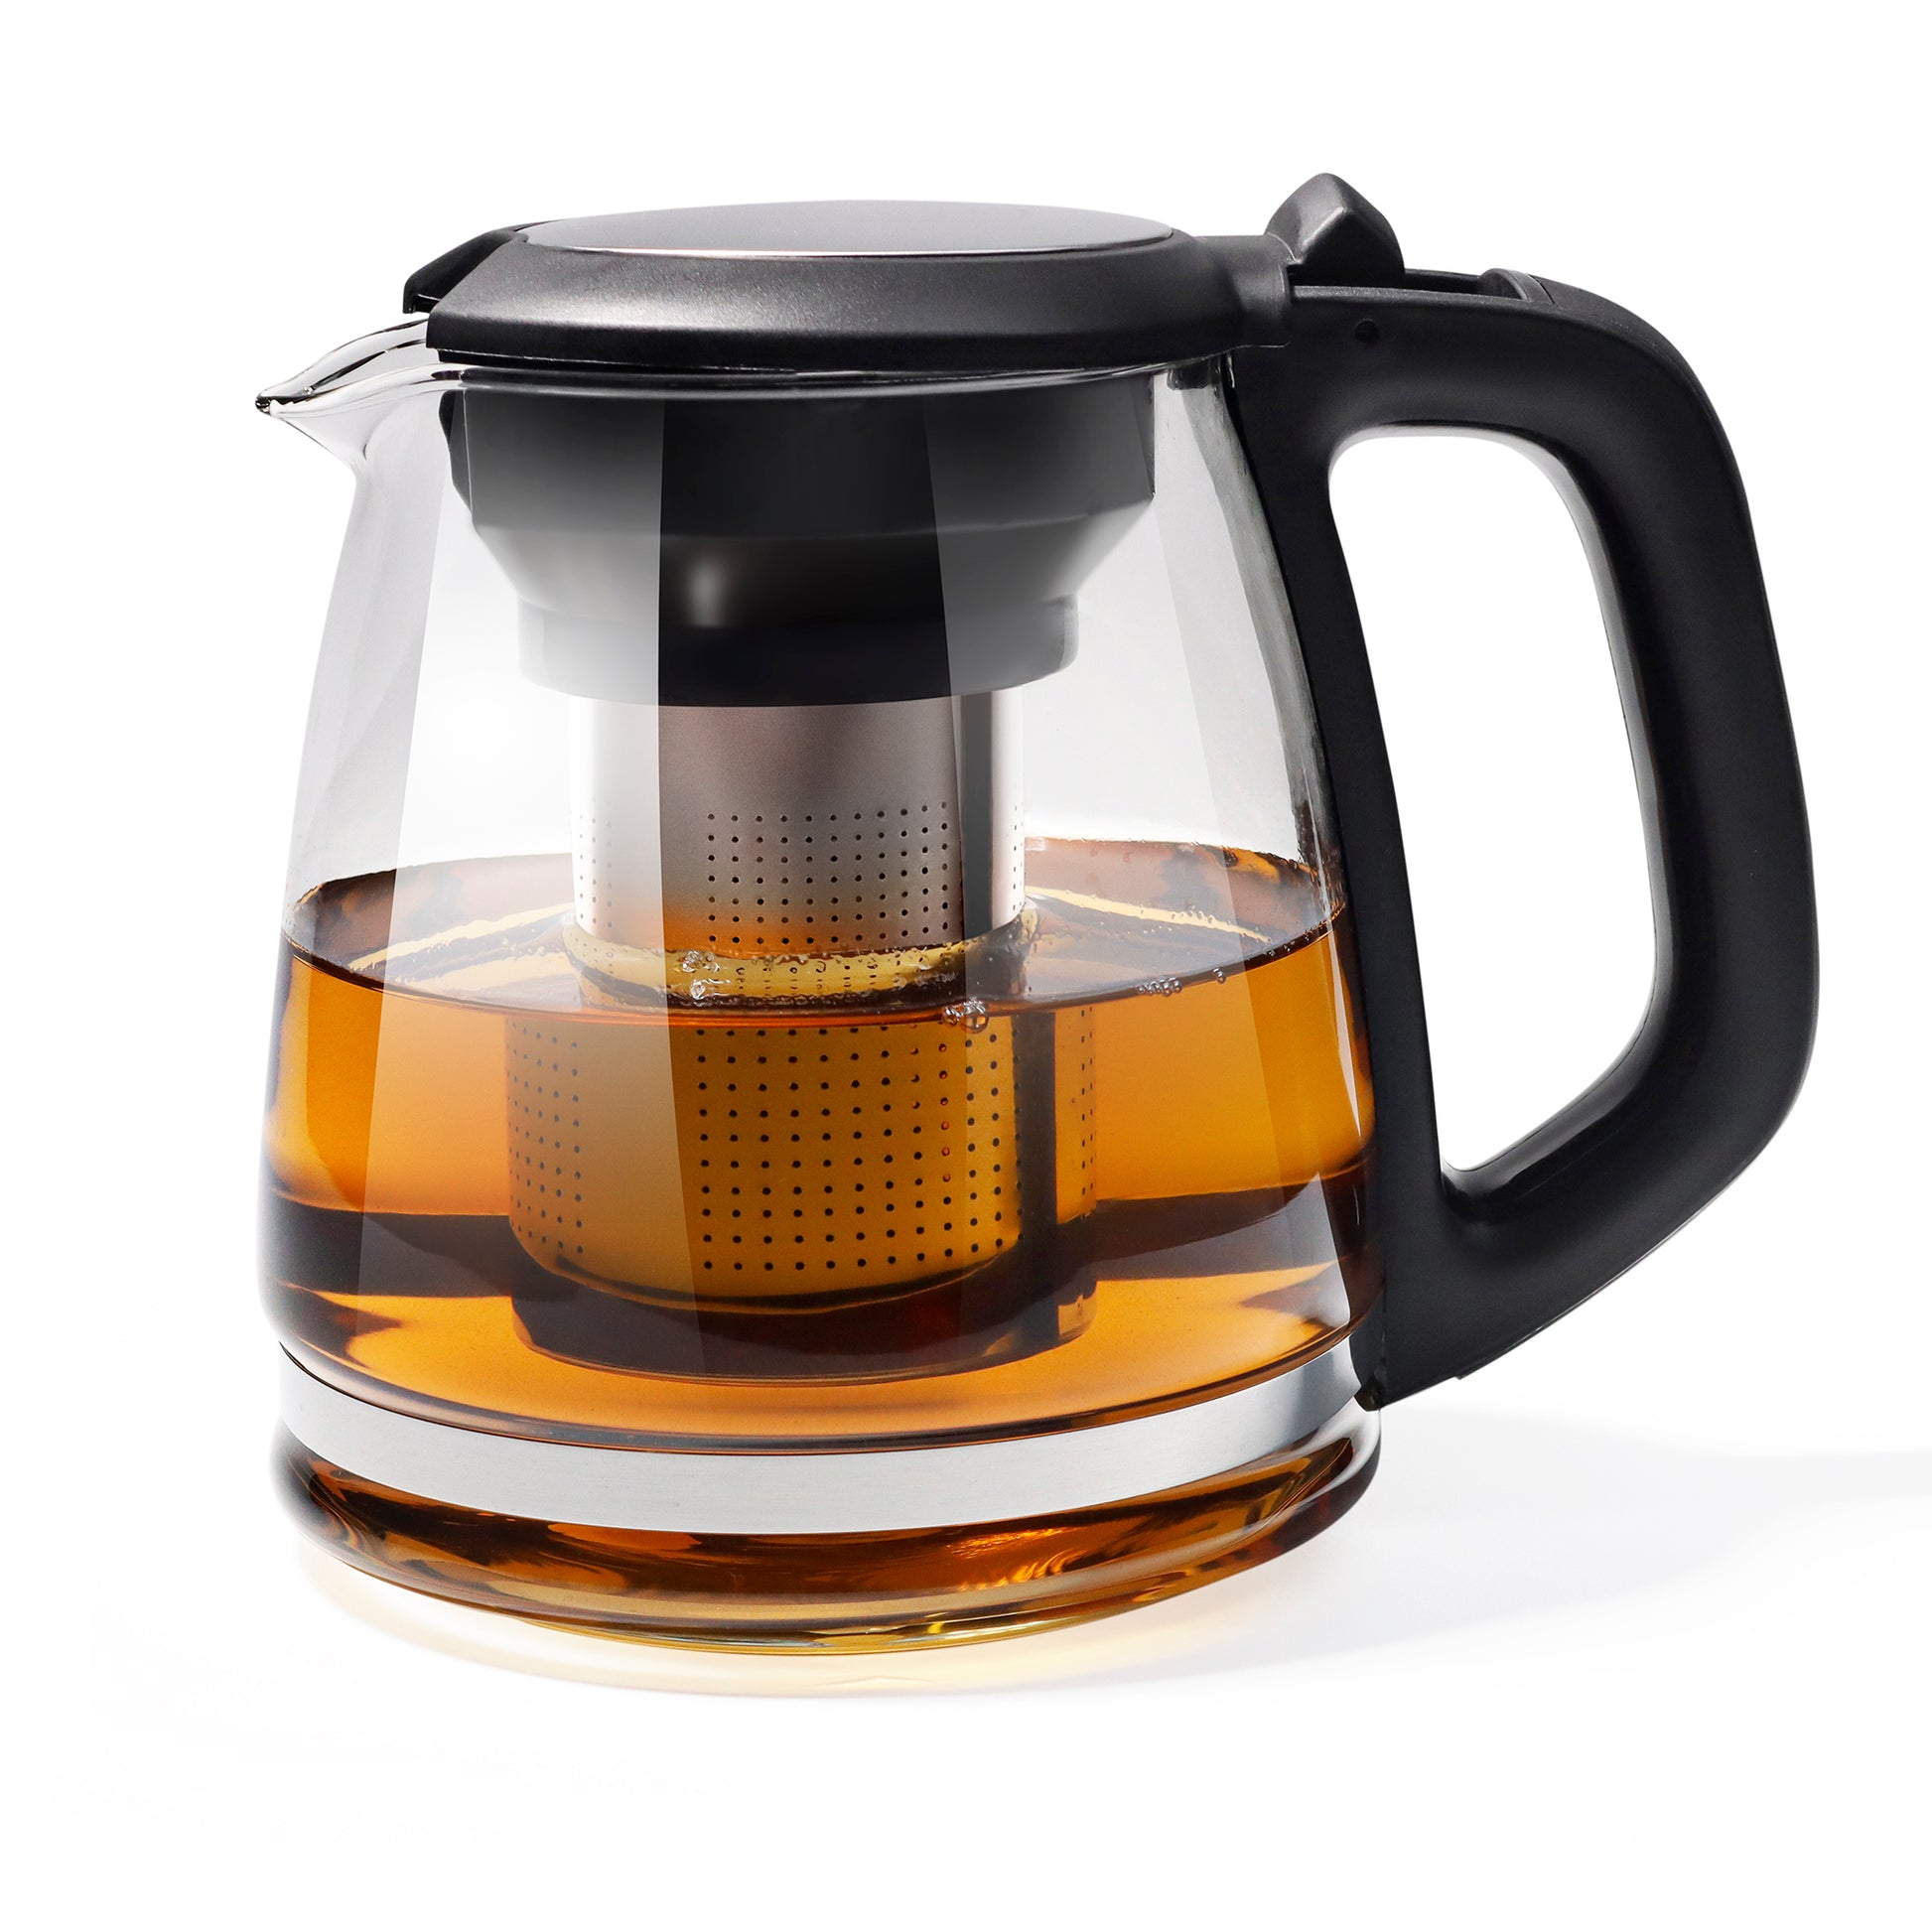 Hand Made Heat-resistant 304 stainless steel Teapot Tea Infuser Pot With  Wooden Handle Boiling Tea